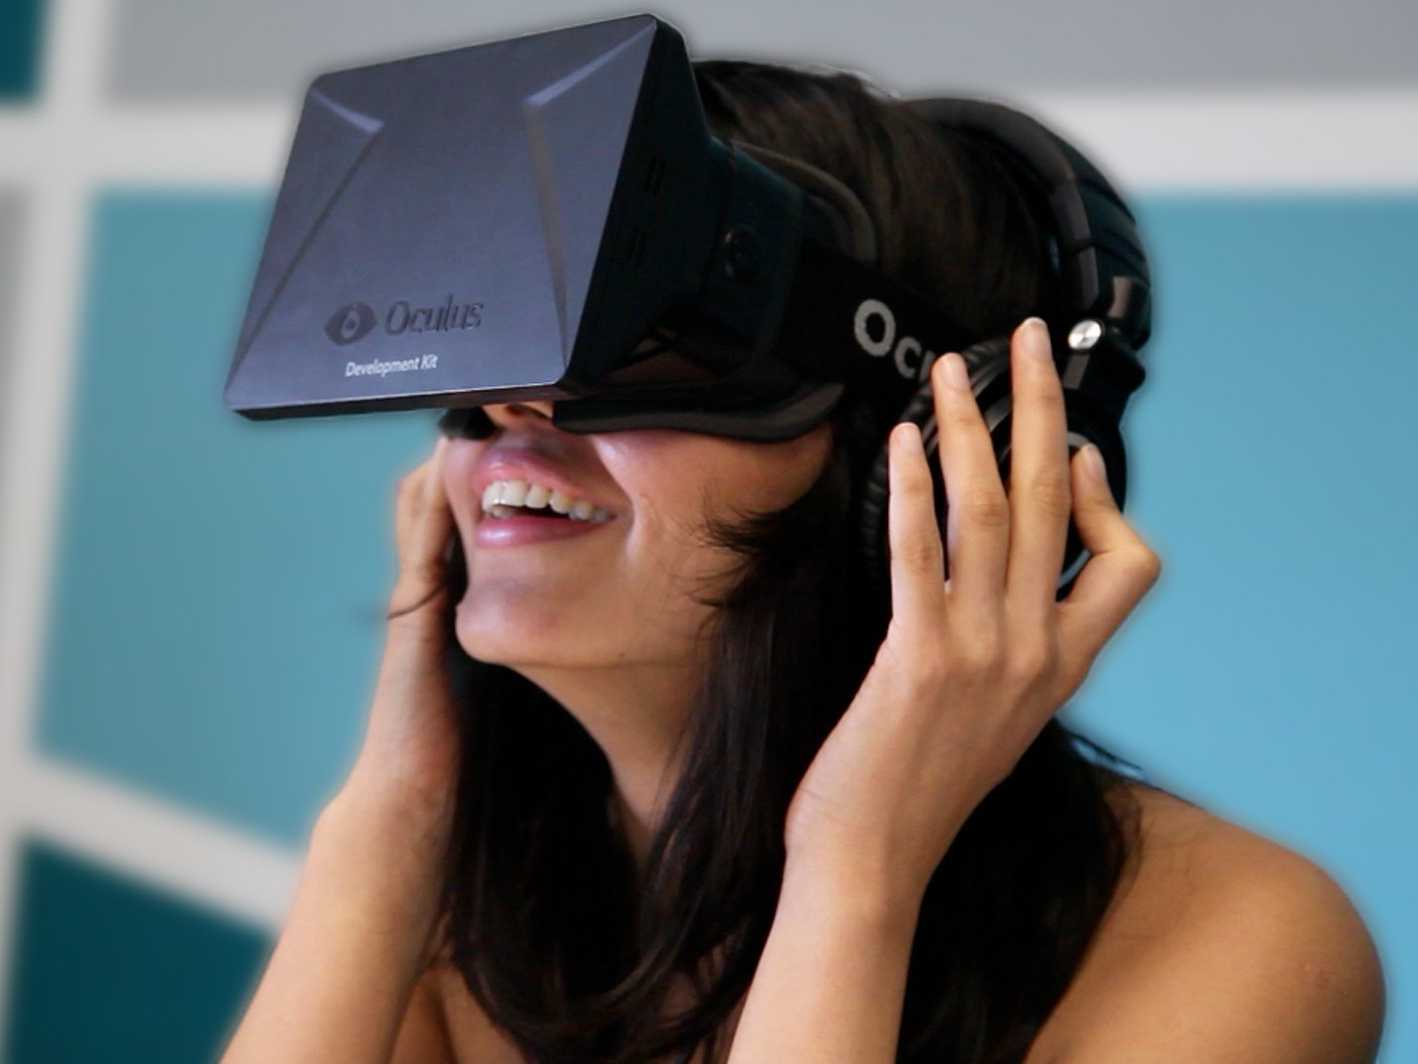 Geek insider, geekinsider, geekinsider. Com,, oculus rift is one step closer to reality with another secured round of funding, news